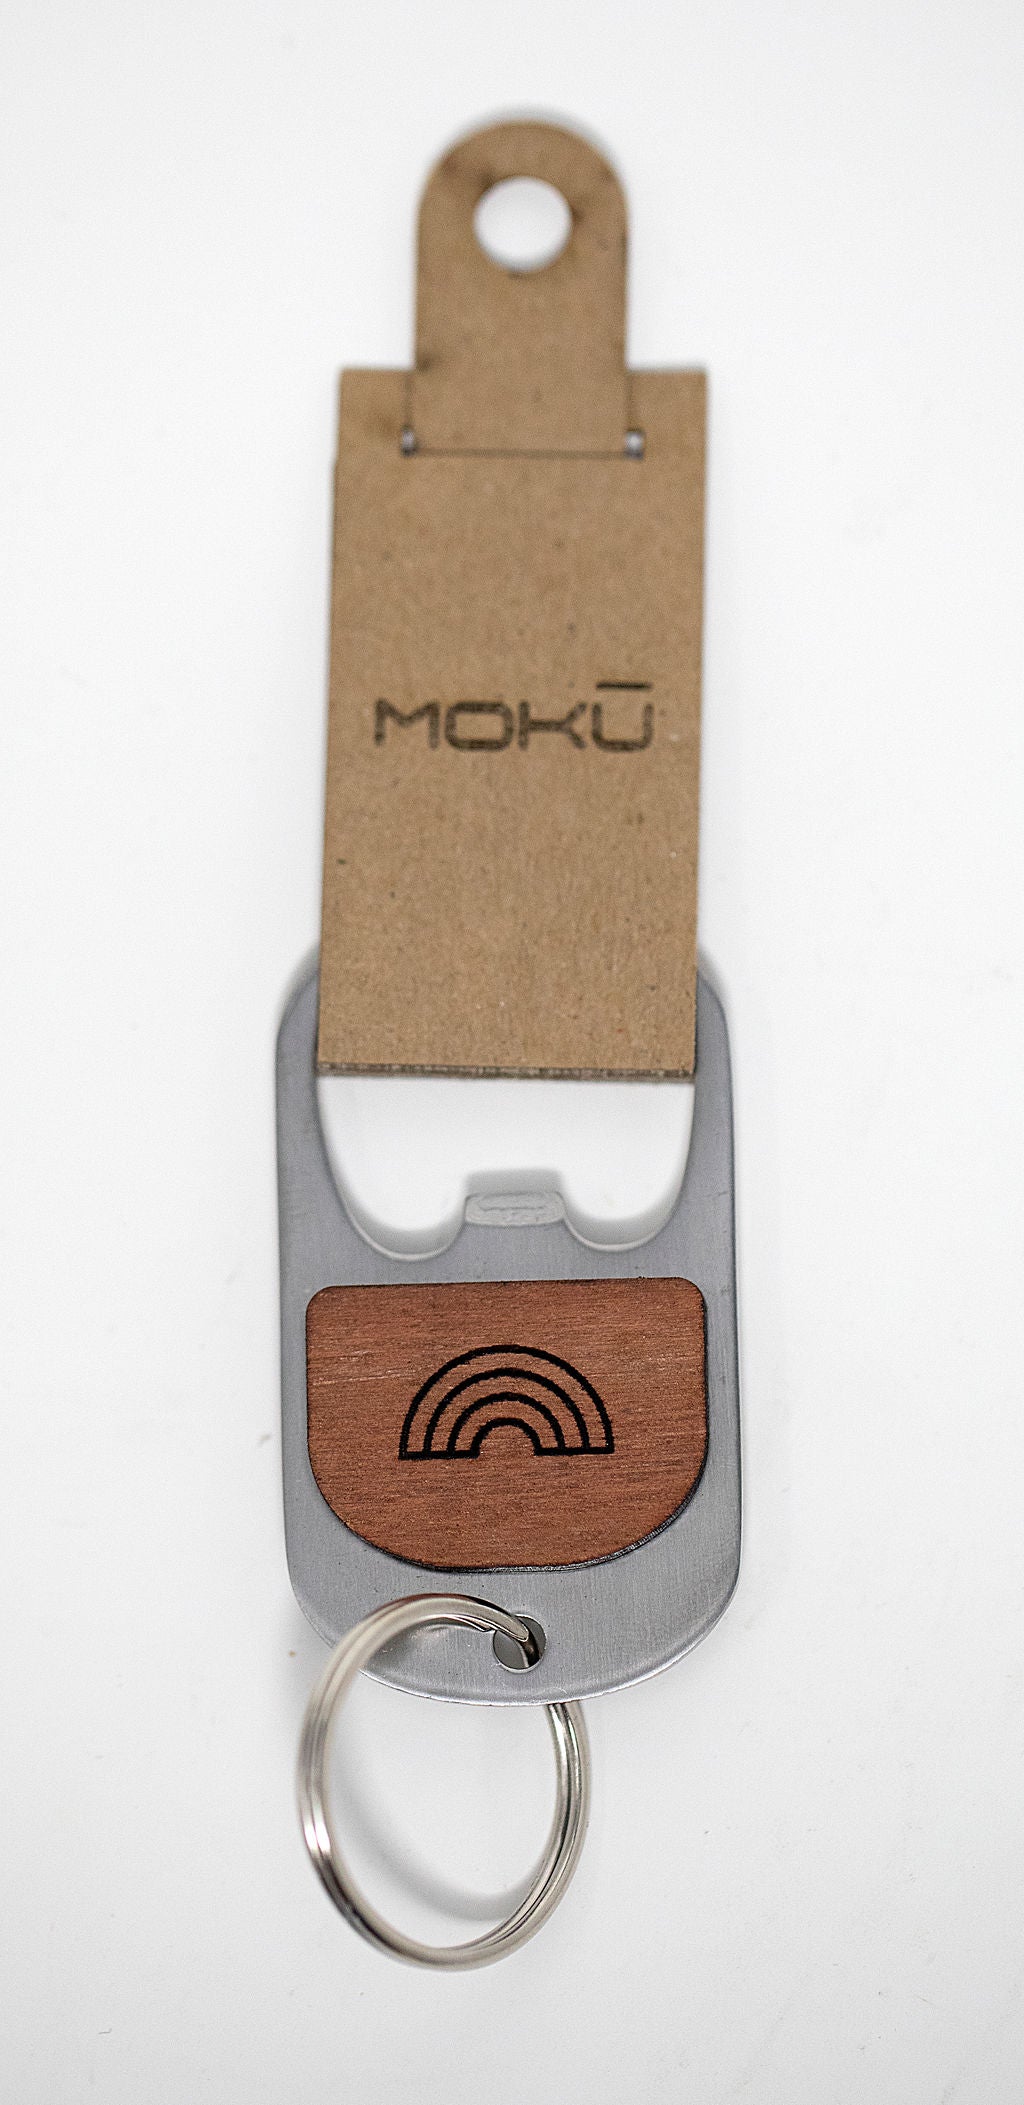 Eucalyptus wood and metal keychain bottle opener made in Maui Hawaii etched with outline of rainbow